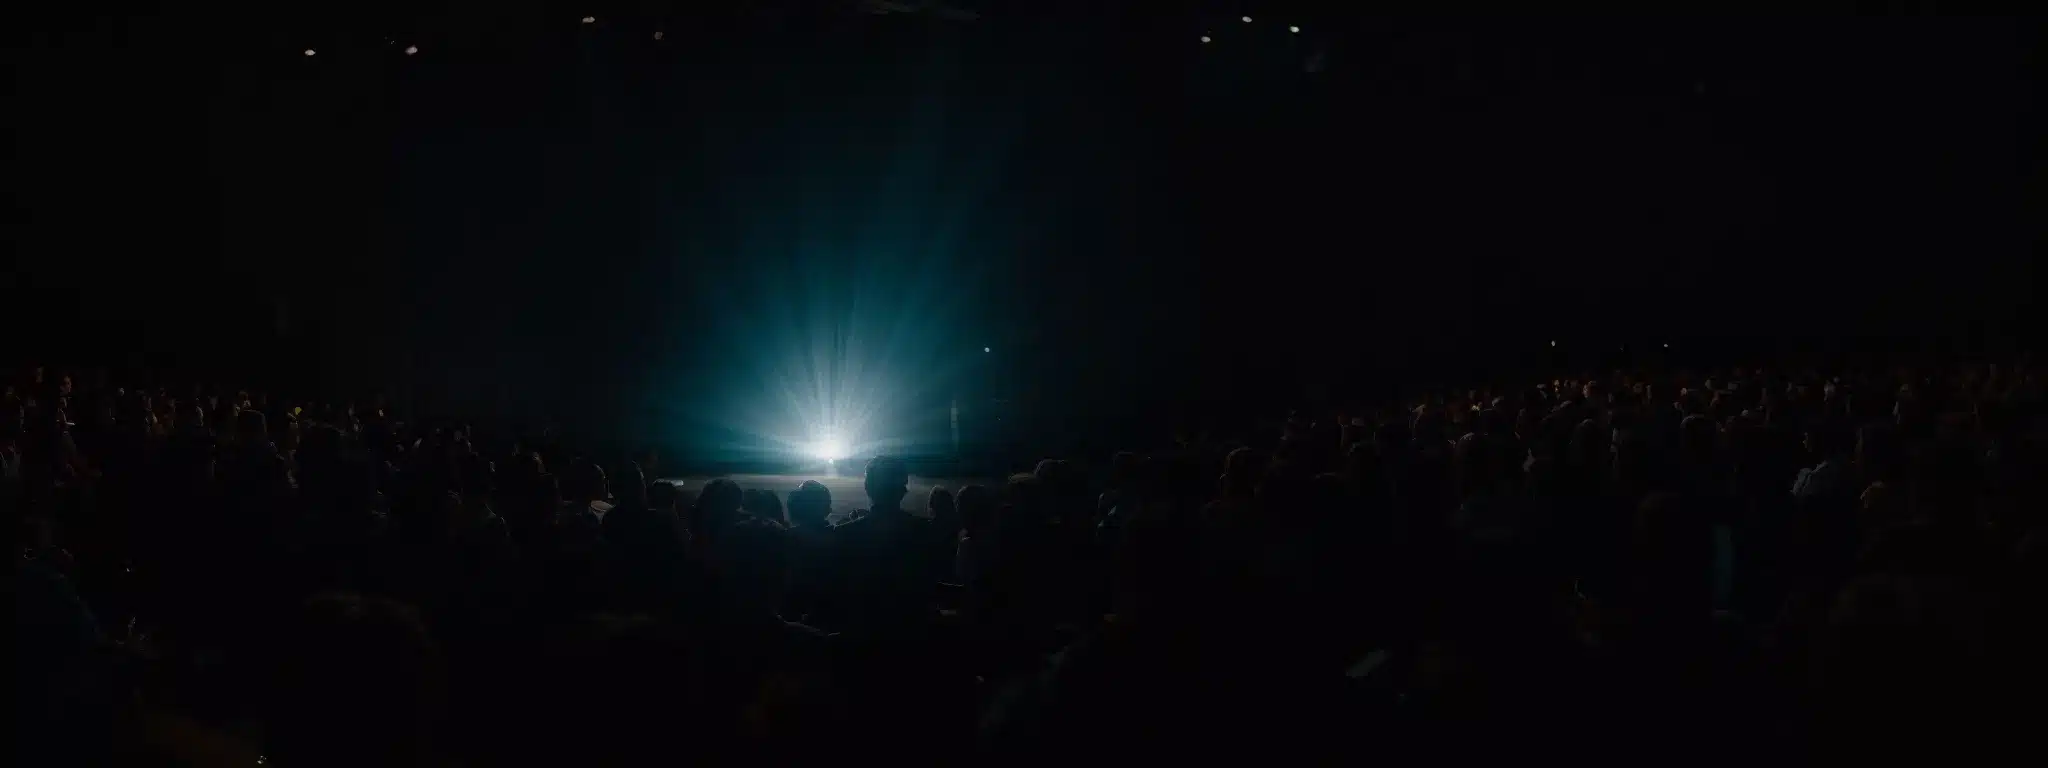 A Spotlight Illuminating A Standout Product On A Stage While A Shadowed Audience Watches In Anticipation.